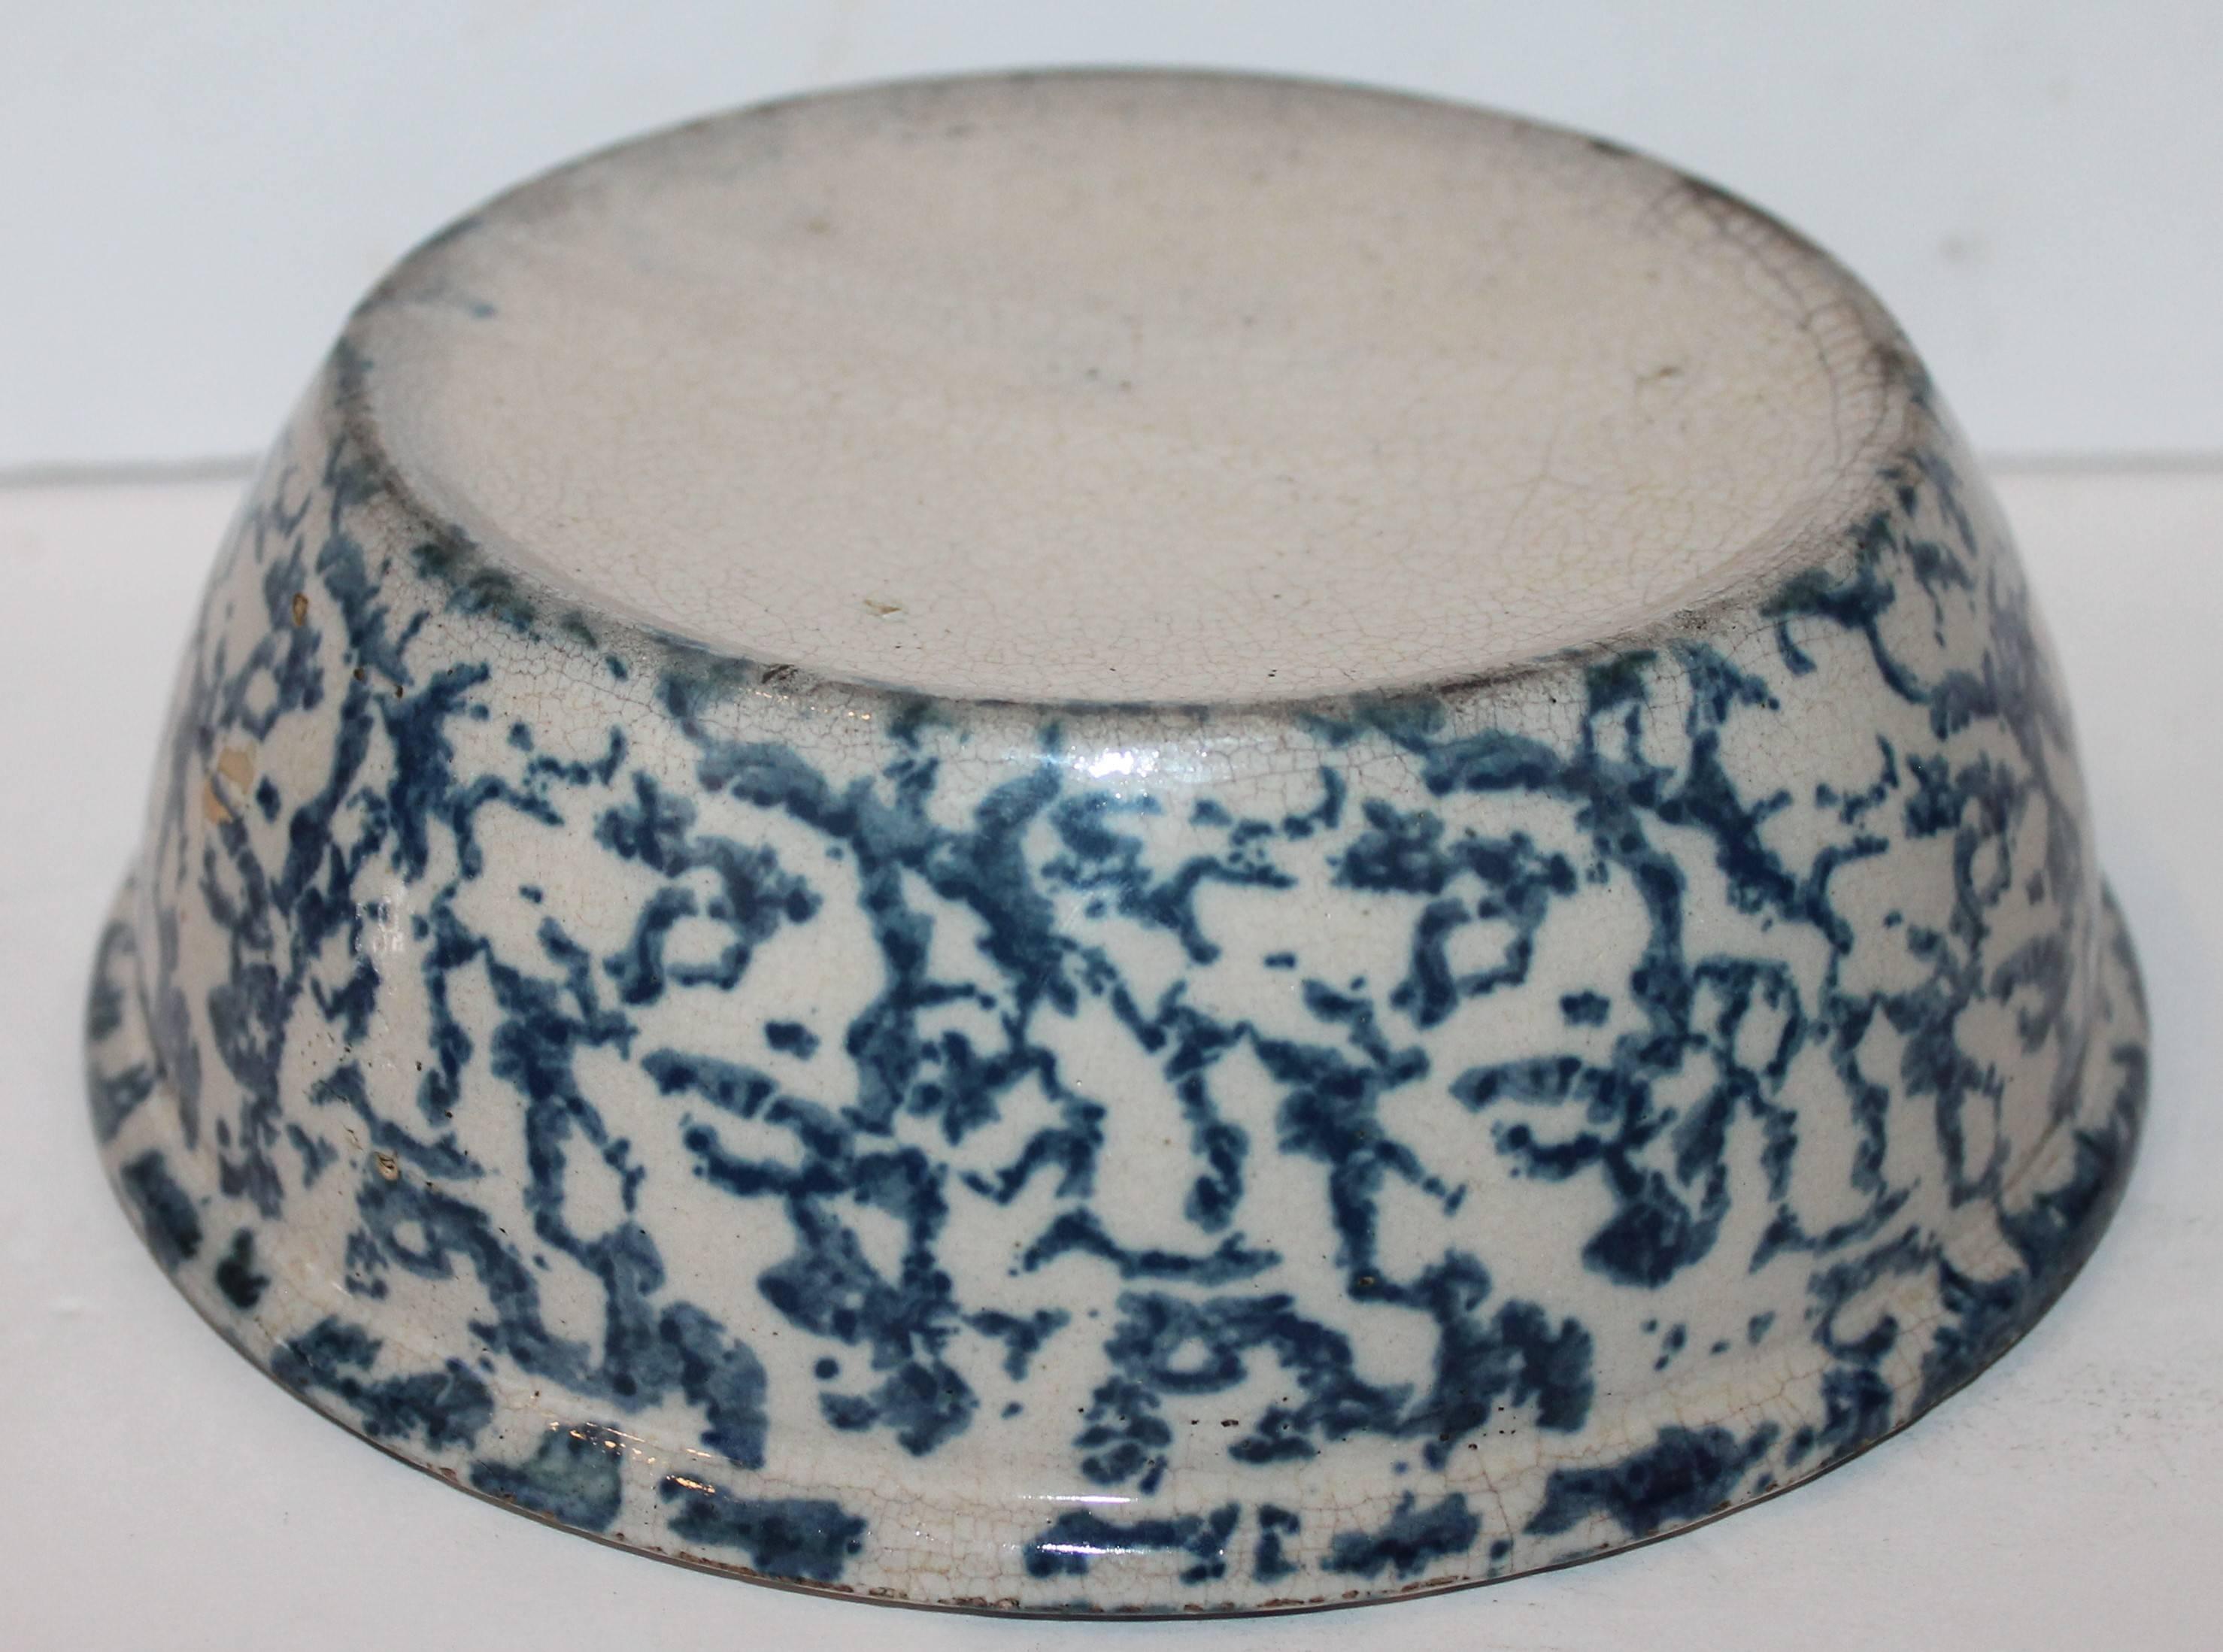 Hand-Painted 19th Century Sponge Ware Pottery Serving Bowl For Sale